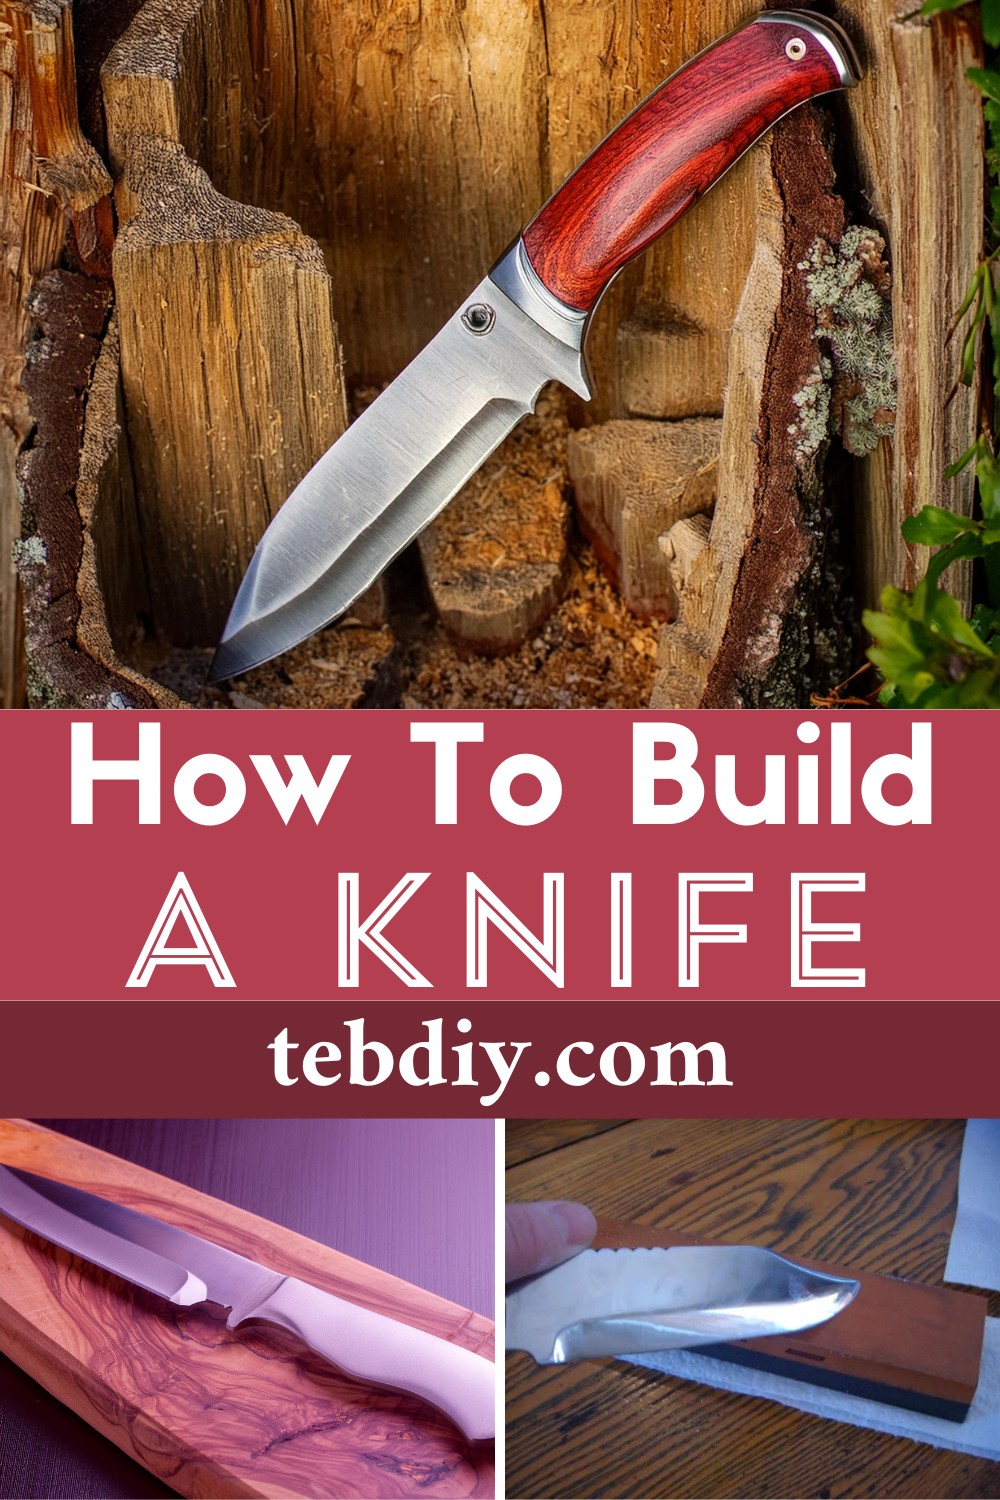 How To Build A Knife